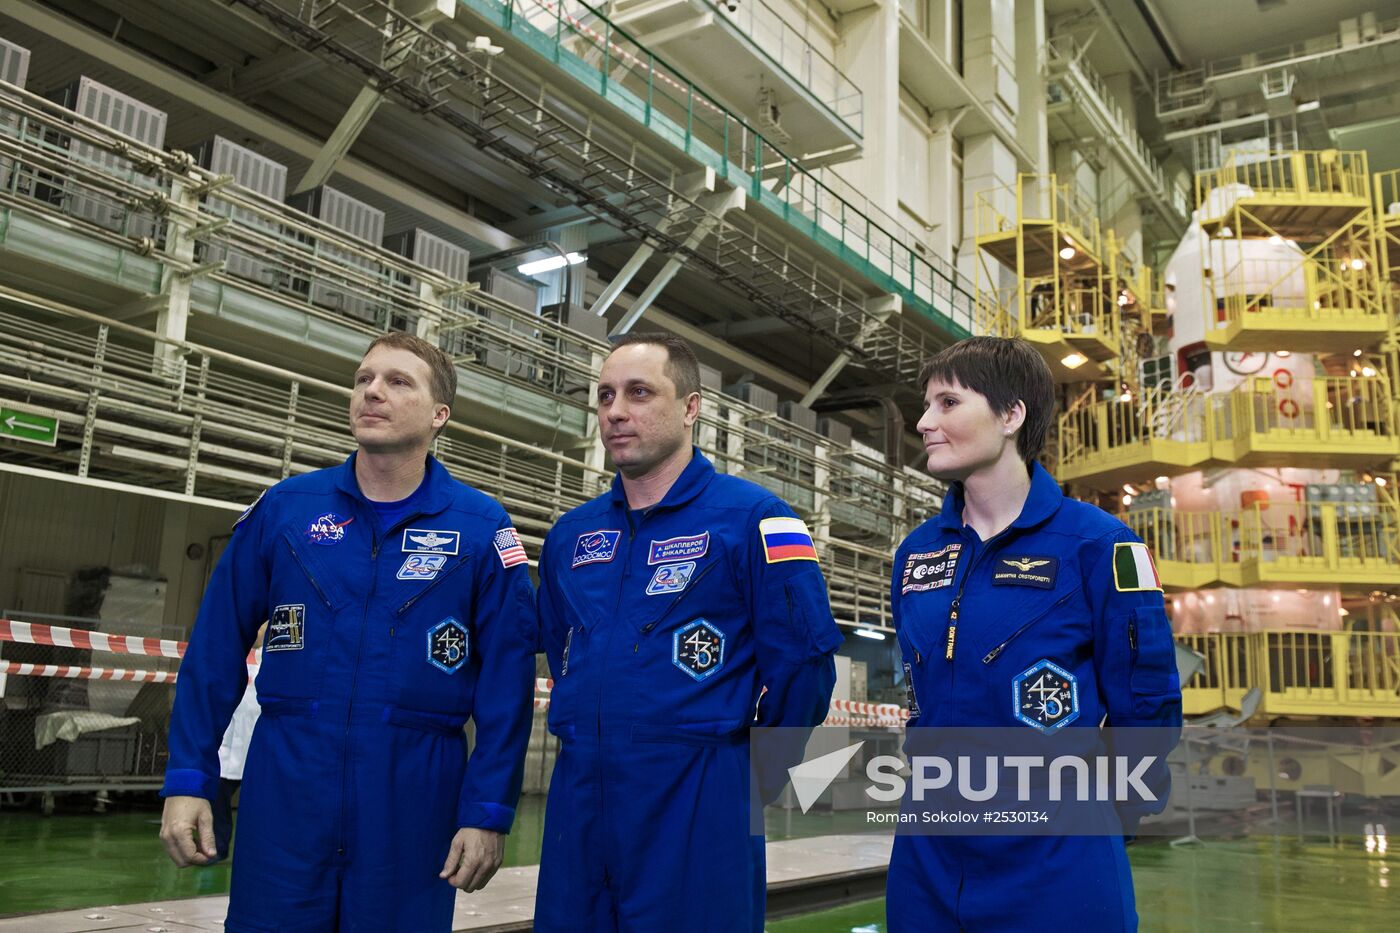 Final inspection of spacecraft and museum visit for crew of 42/43 ISS expedition